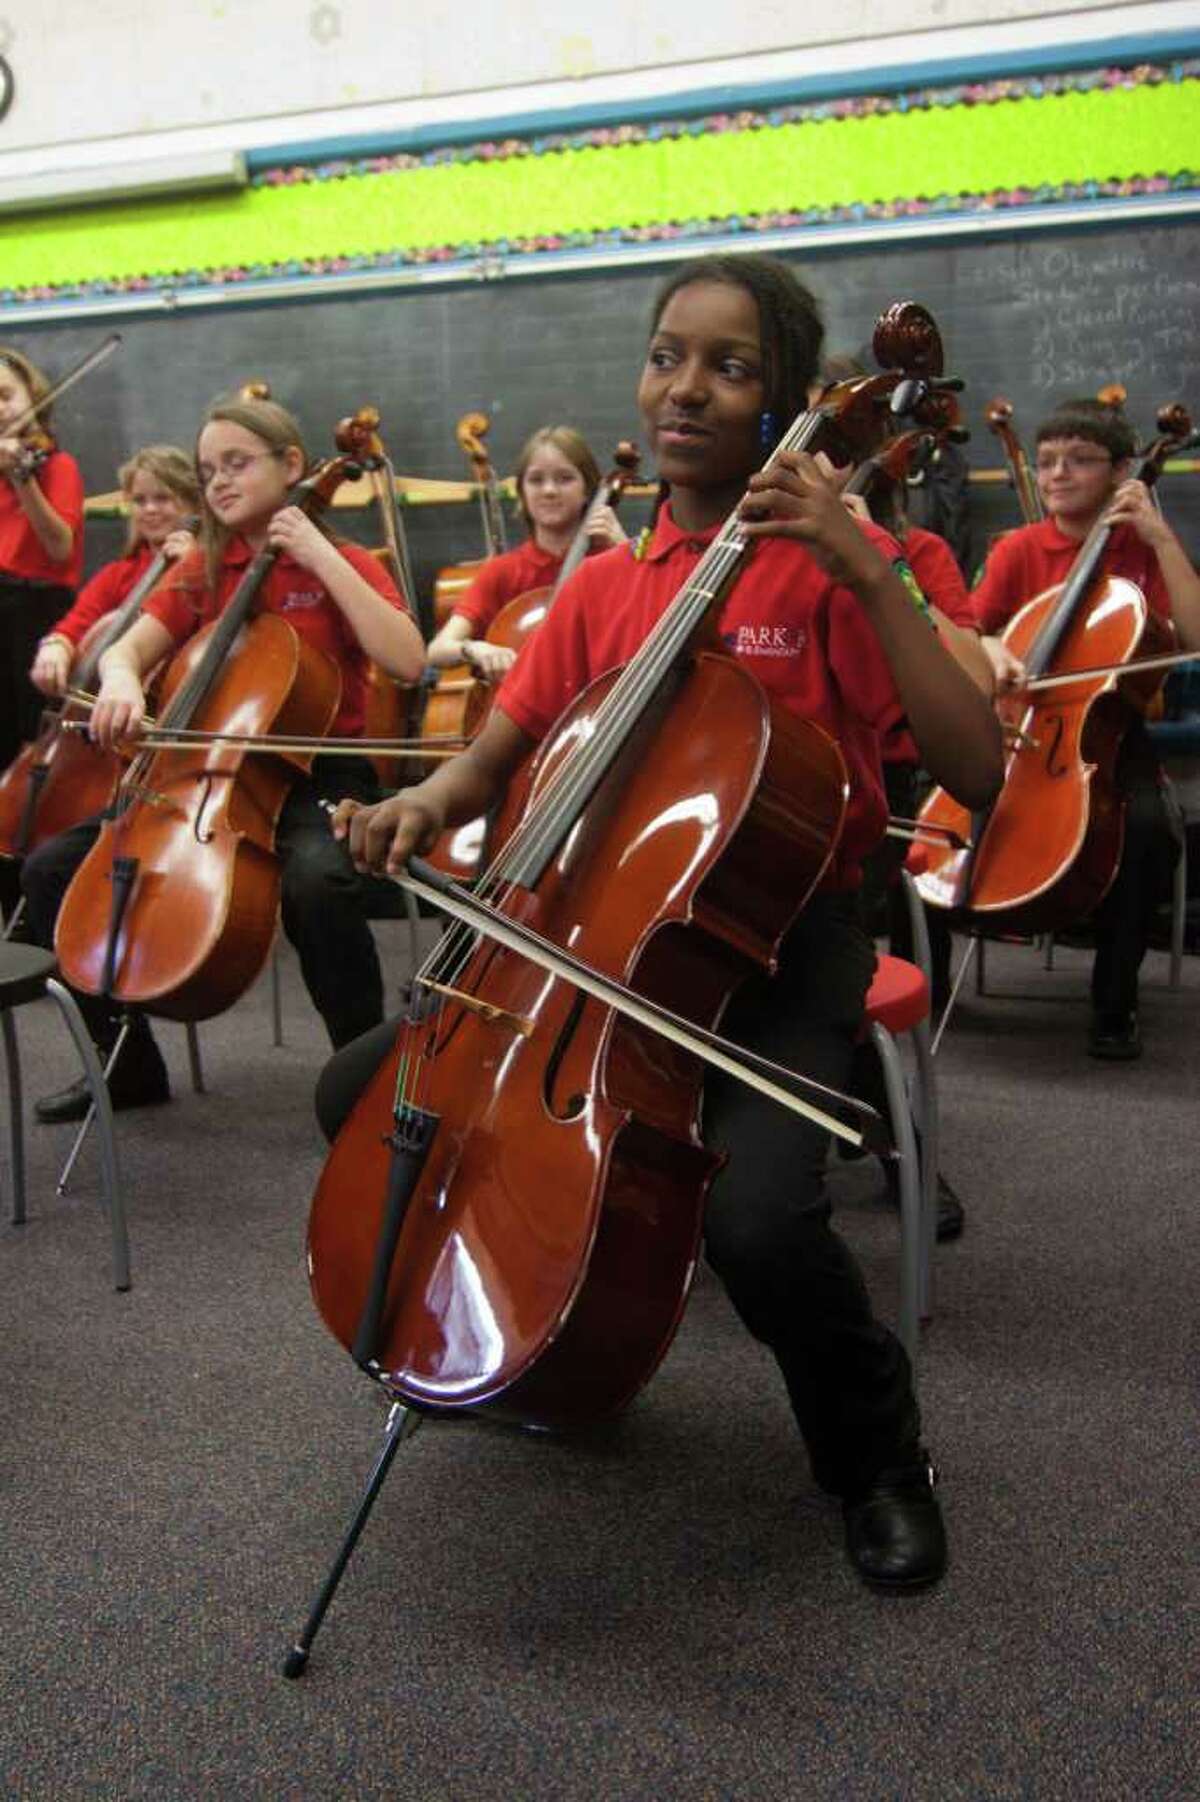 Cellist Myah McNair, 10, and other fifth-grade members of the Parker Elementary School ensemble practice. The group is raising funds to attend a Suzuki Association conference in May in Minneapolis.